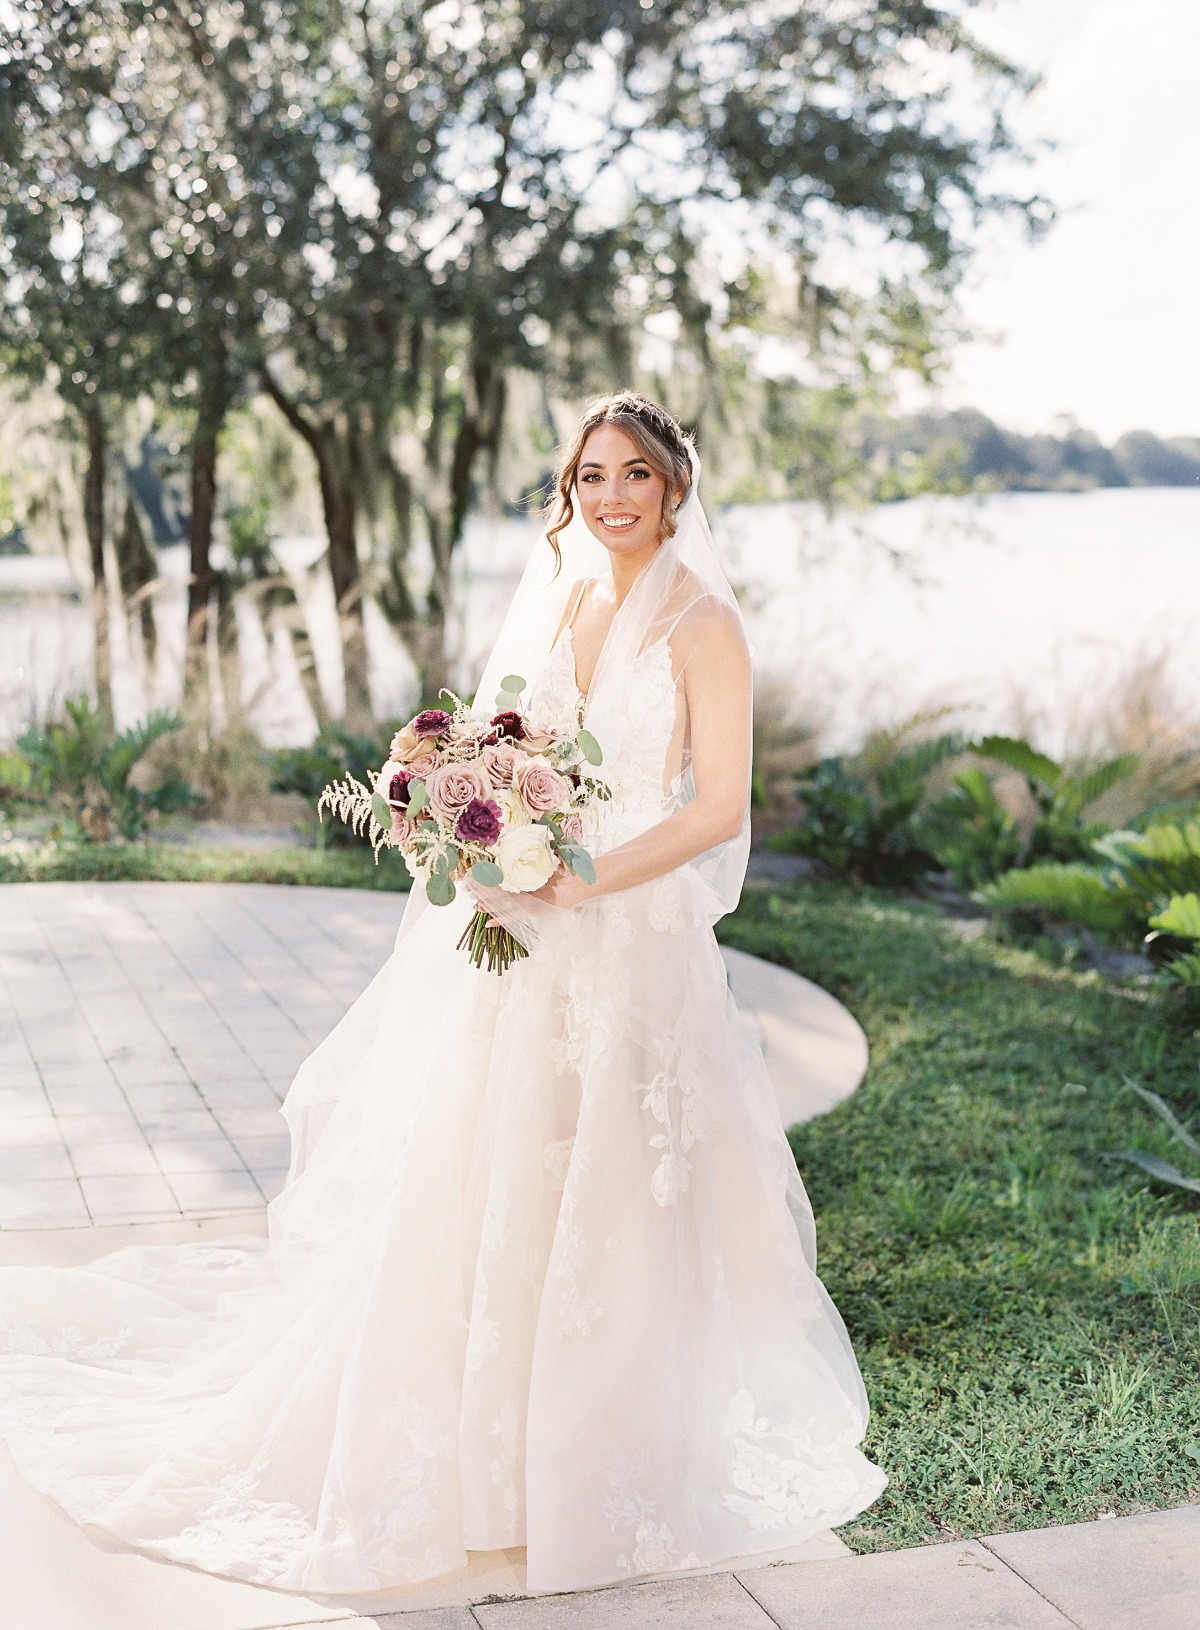 You've Never Seen A Florida Wedding Like This Before